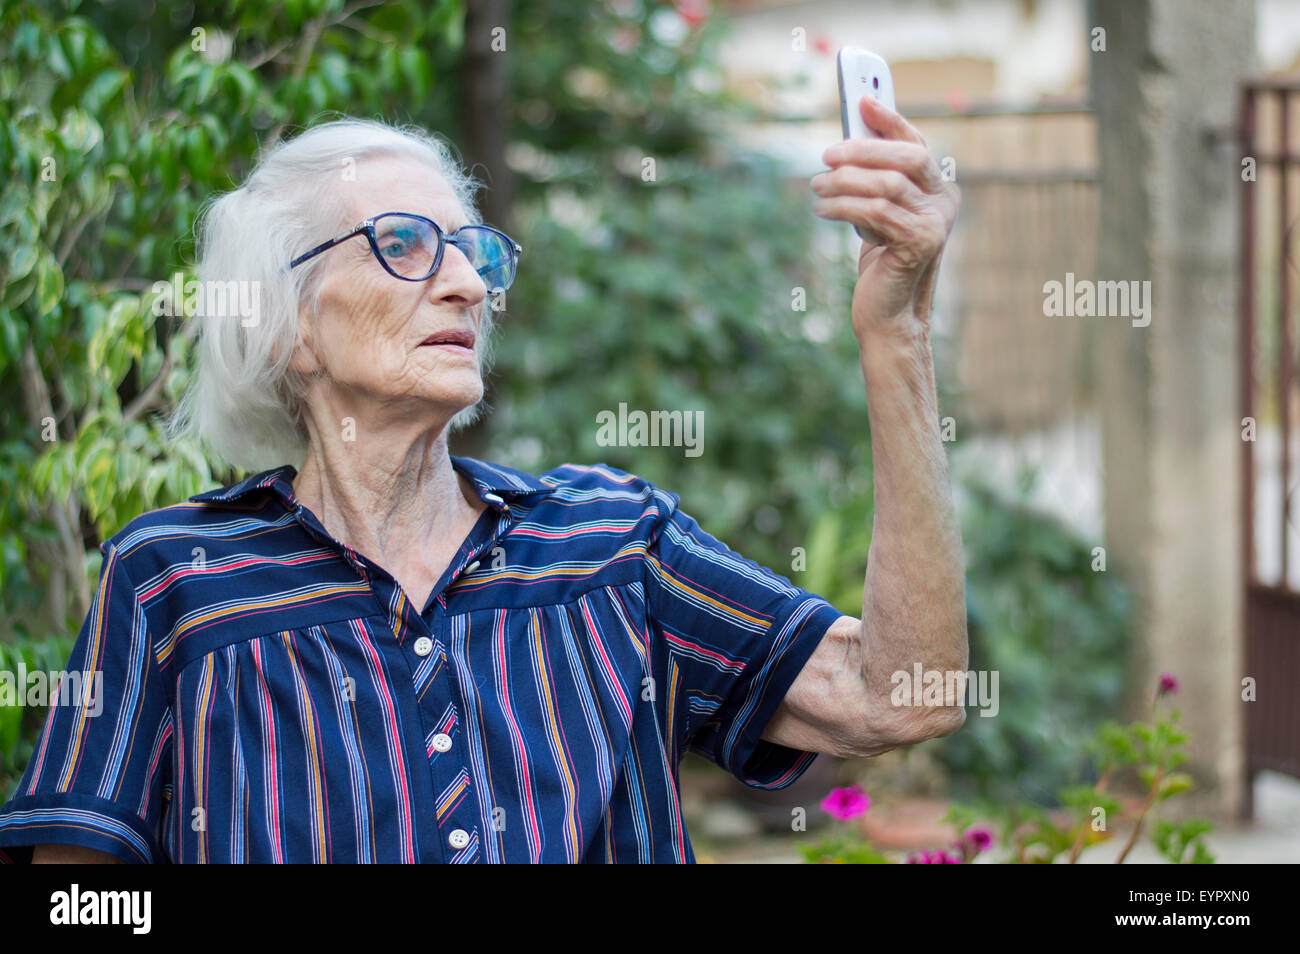 Ninety years old grandma taking a selfie with a smartphone in the backyard. Communications abstract Stock Photo